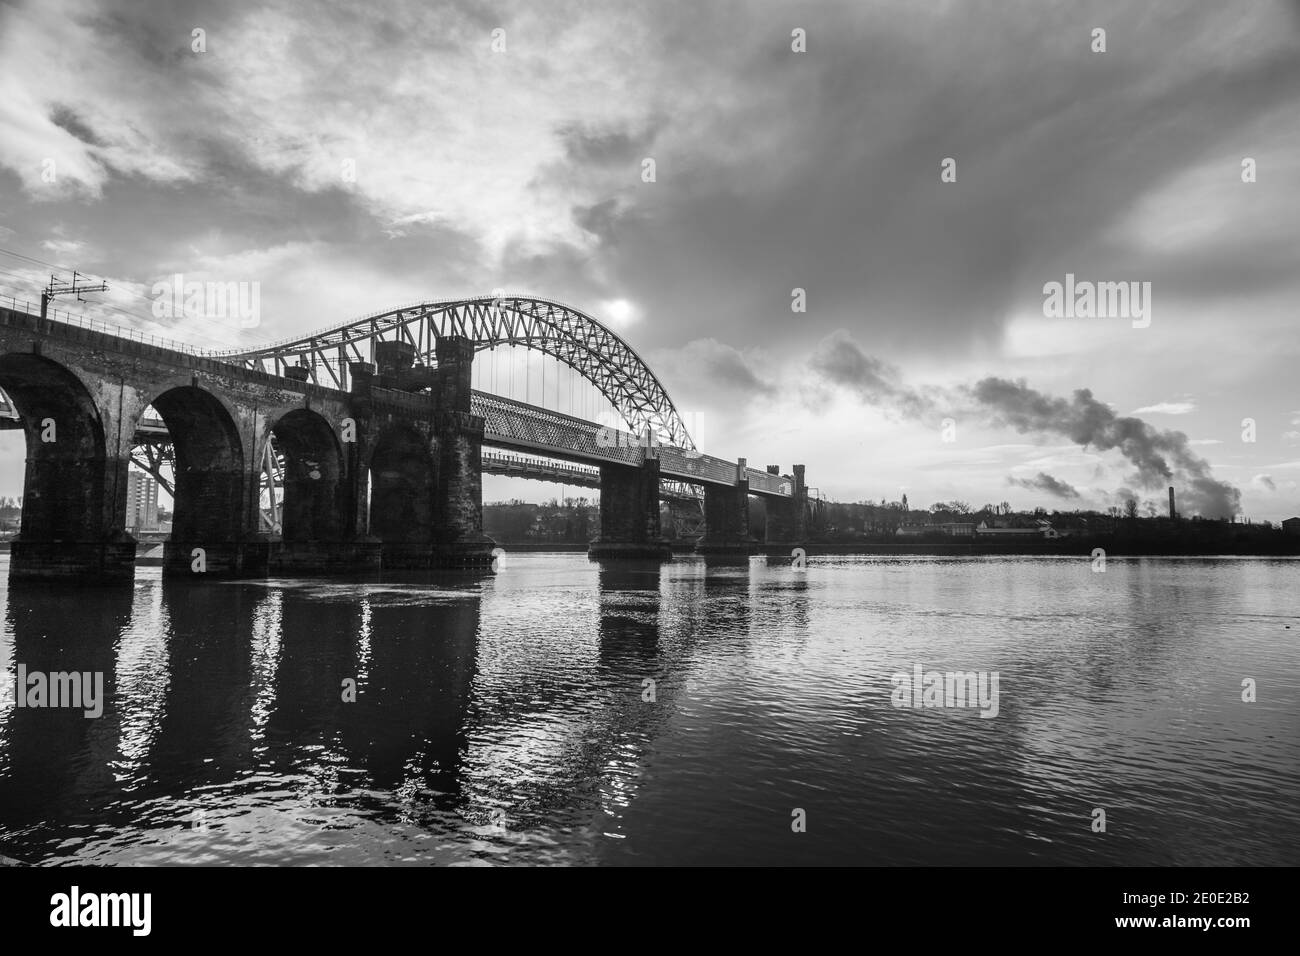 The Runcorn Railway Bridge  (foreground) and the Silver Jubilee Bridge (background) captured in black and white in December 2020. Stock Photo